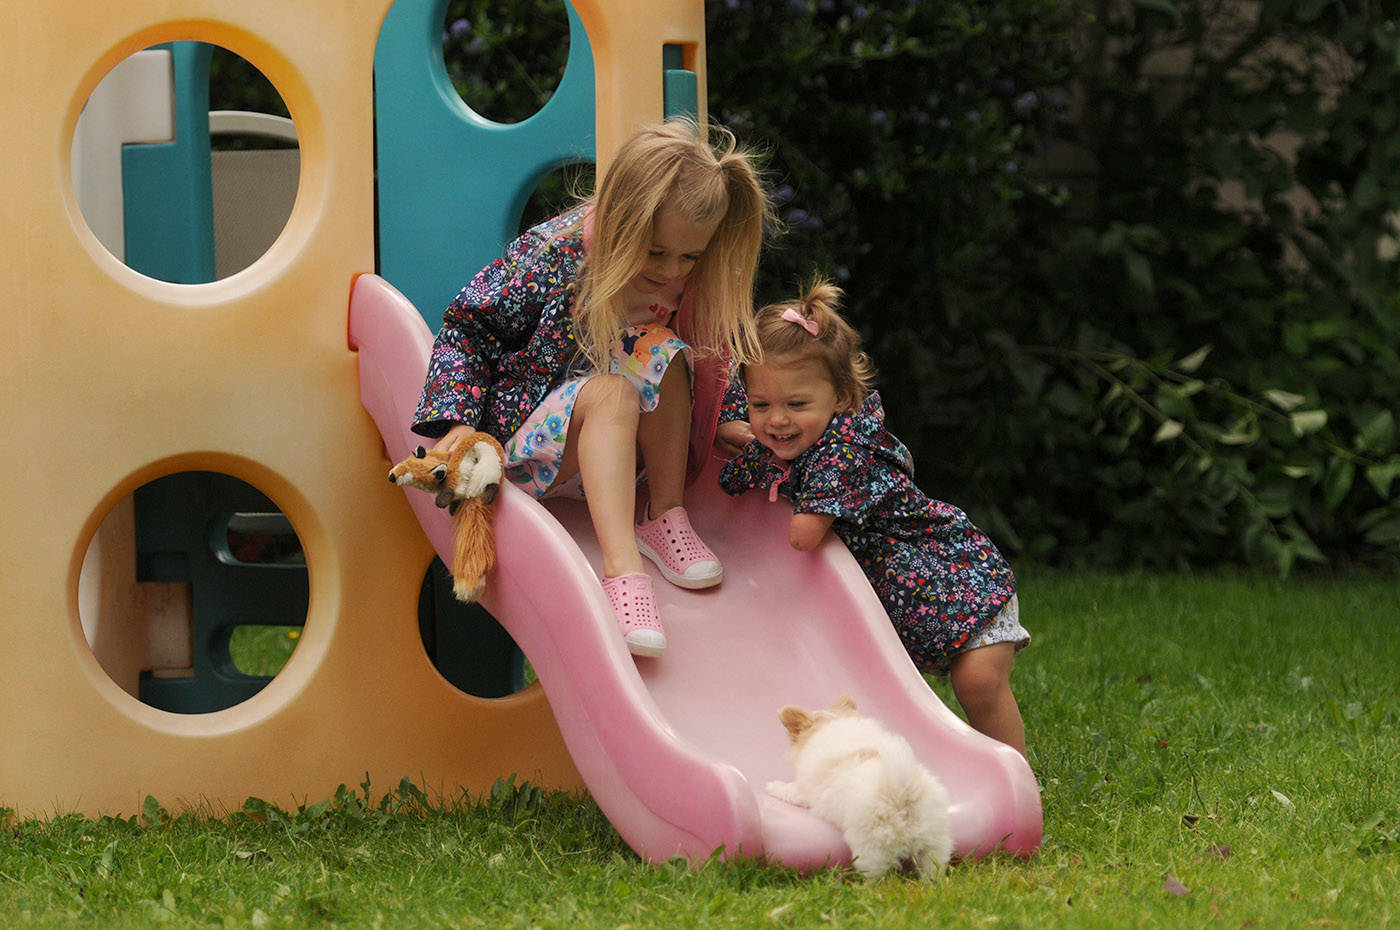 Two-year-old Ivy McLeod and five-year-old sister Elena play with Lucky the puppy outside their Chilliwack home on Thursday, June 10, 2021. (Jenna Hauck/ Chilliwack Progress)